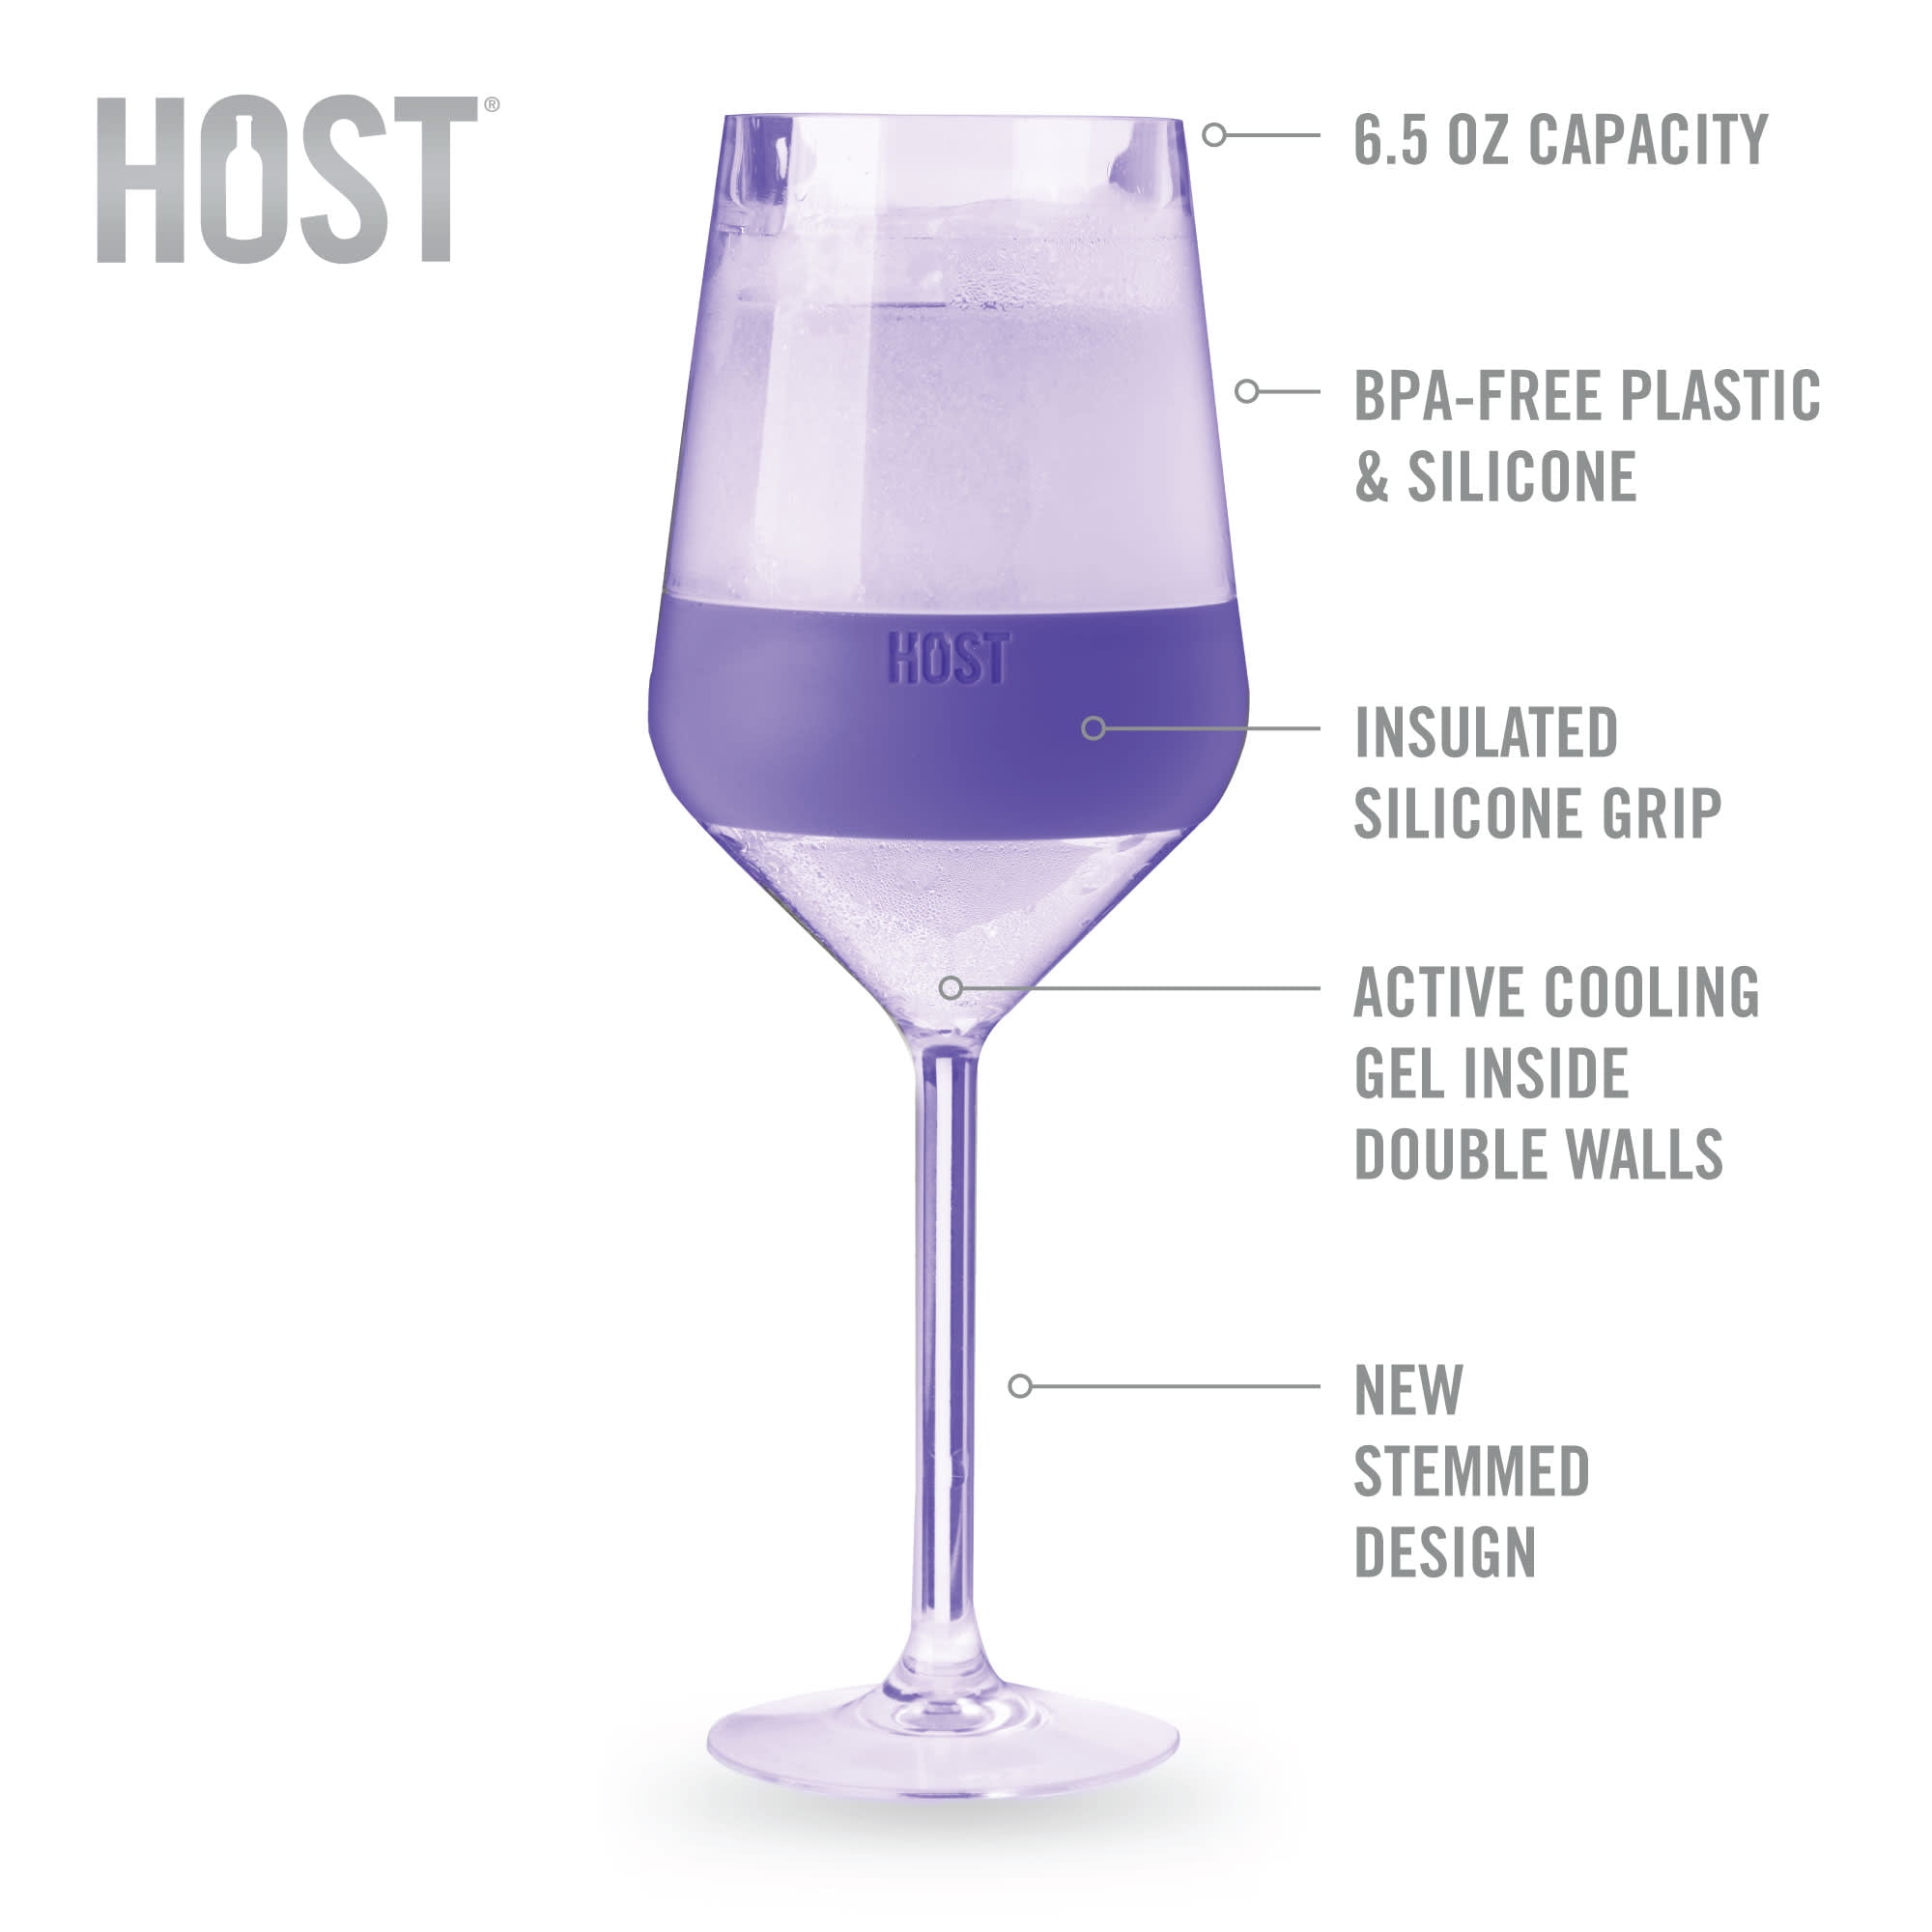 HOST Chilling 12oz. Silicone Stemless Wine Glass Glassware Set & Reviews